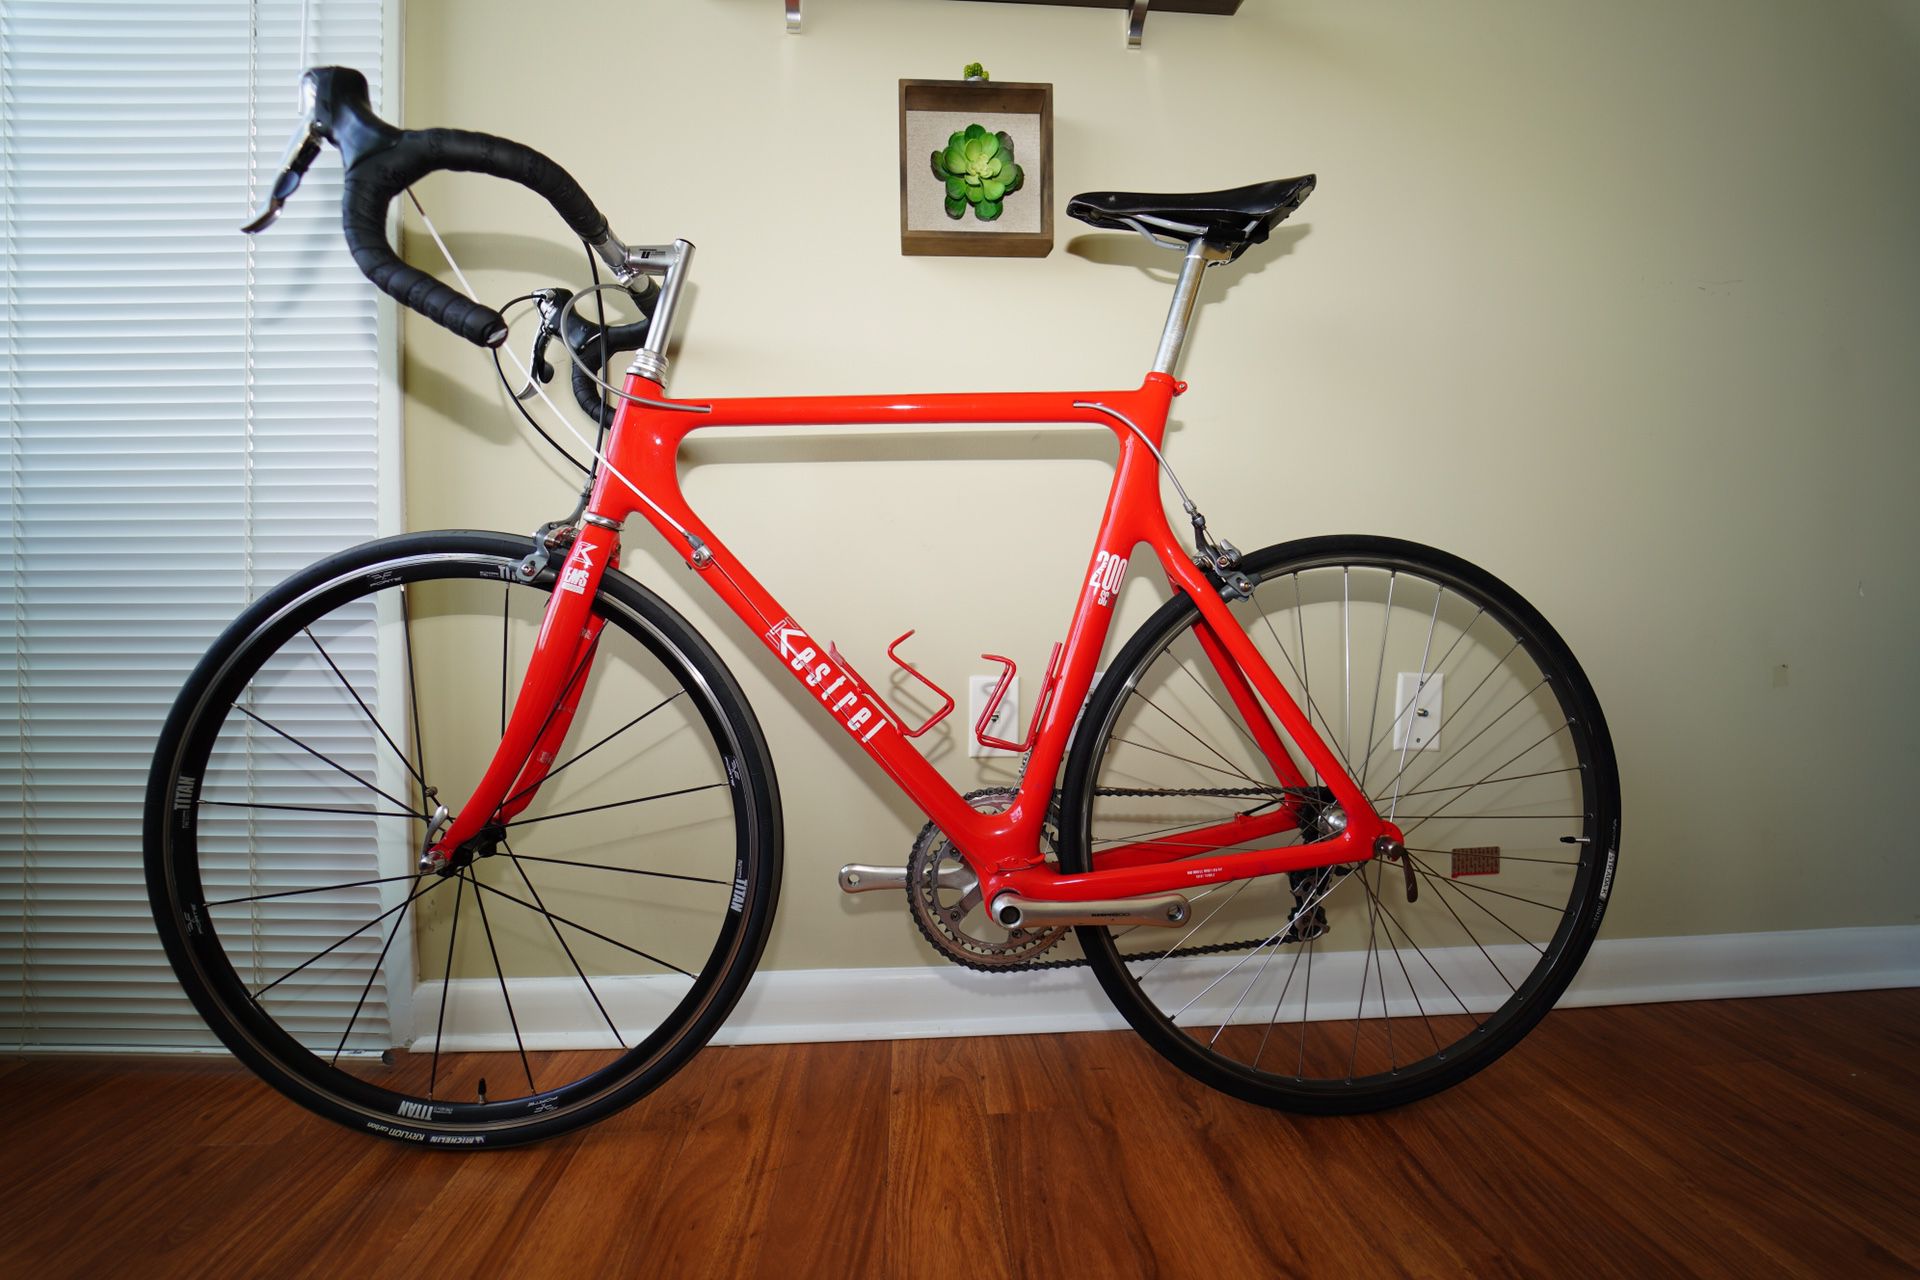 Rare Kestrel carbon bike! Light as 16 lbs. The only reason I’m selling this bike is because it’s too big for me.